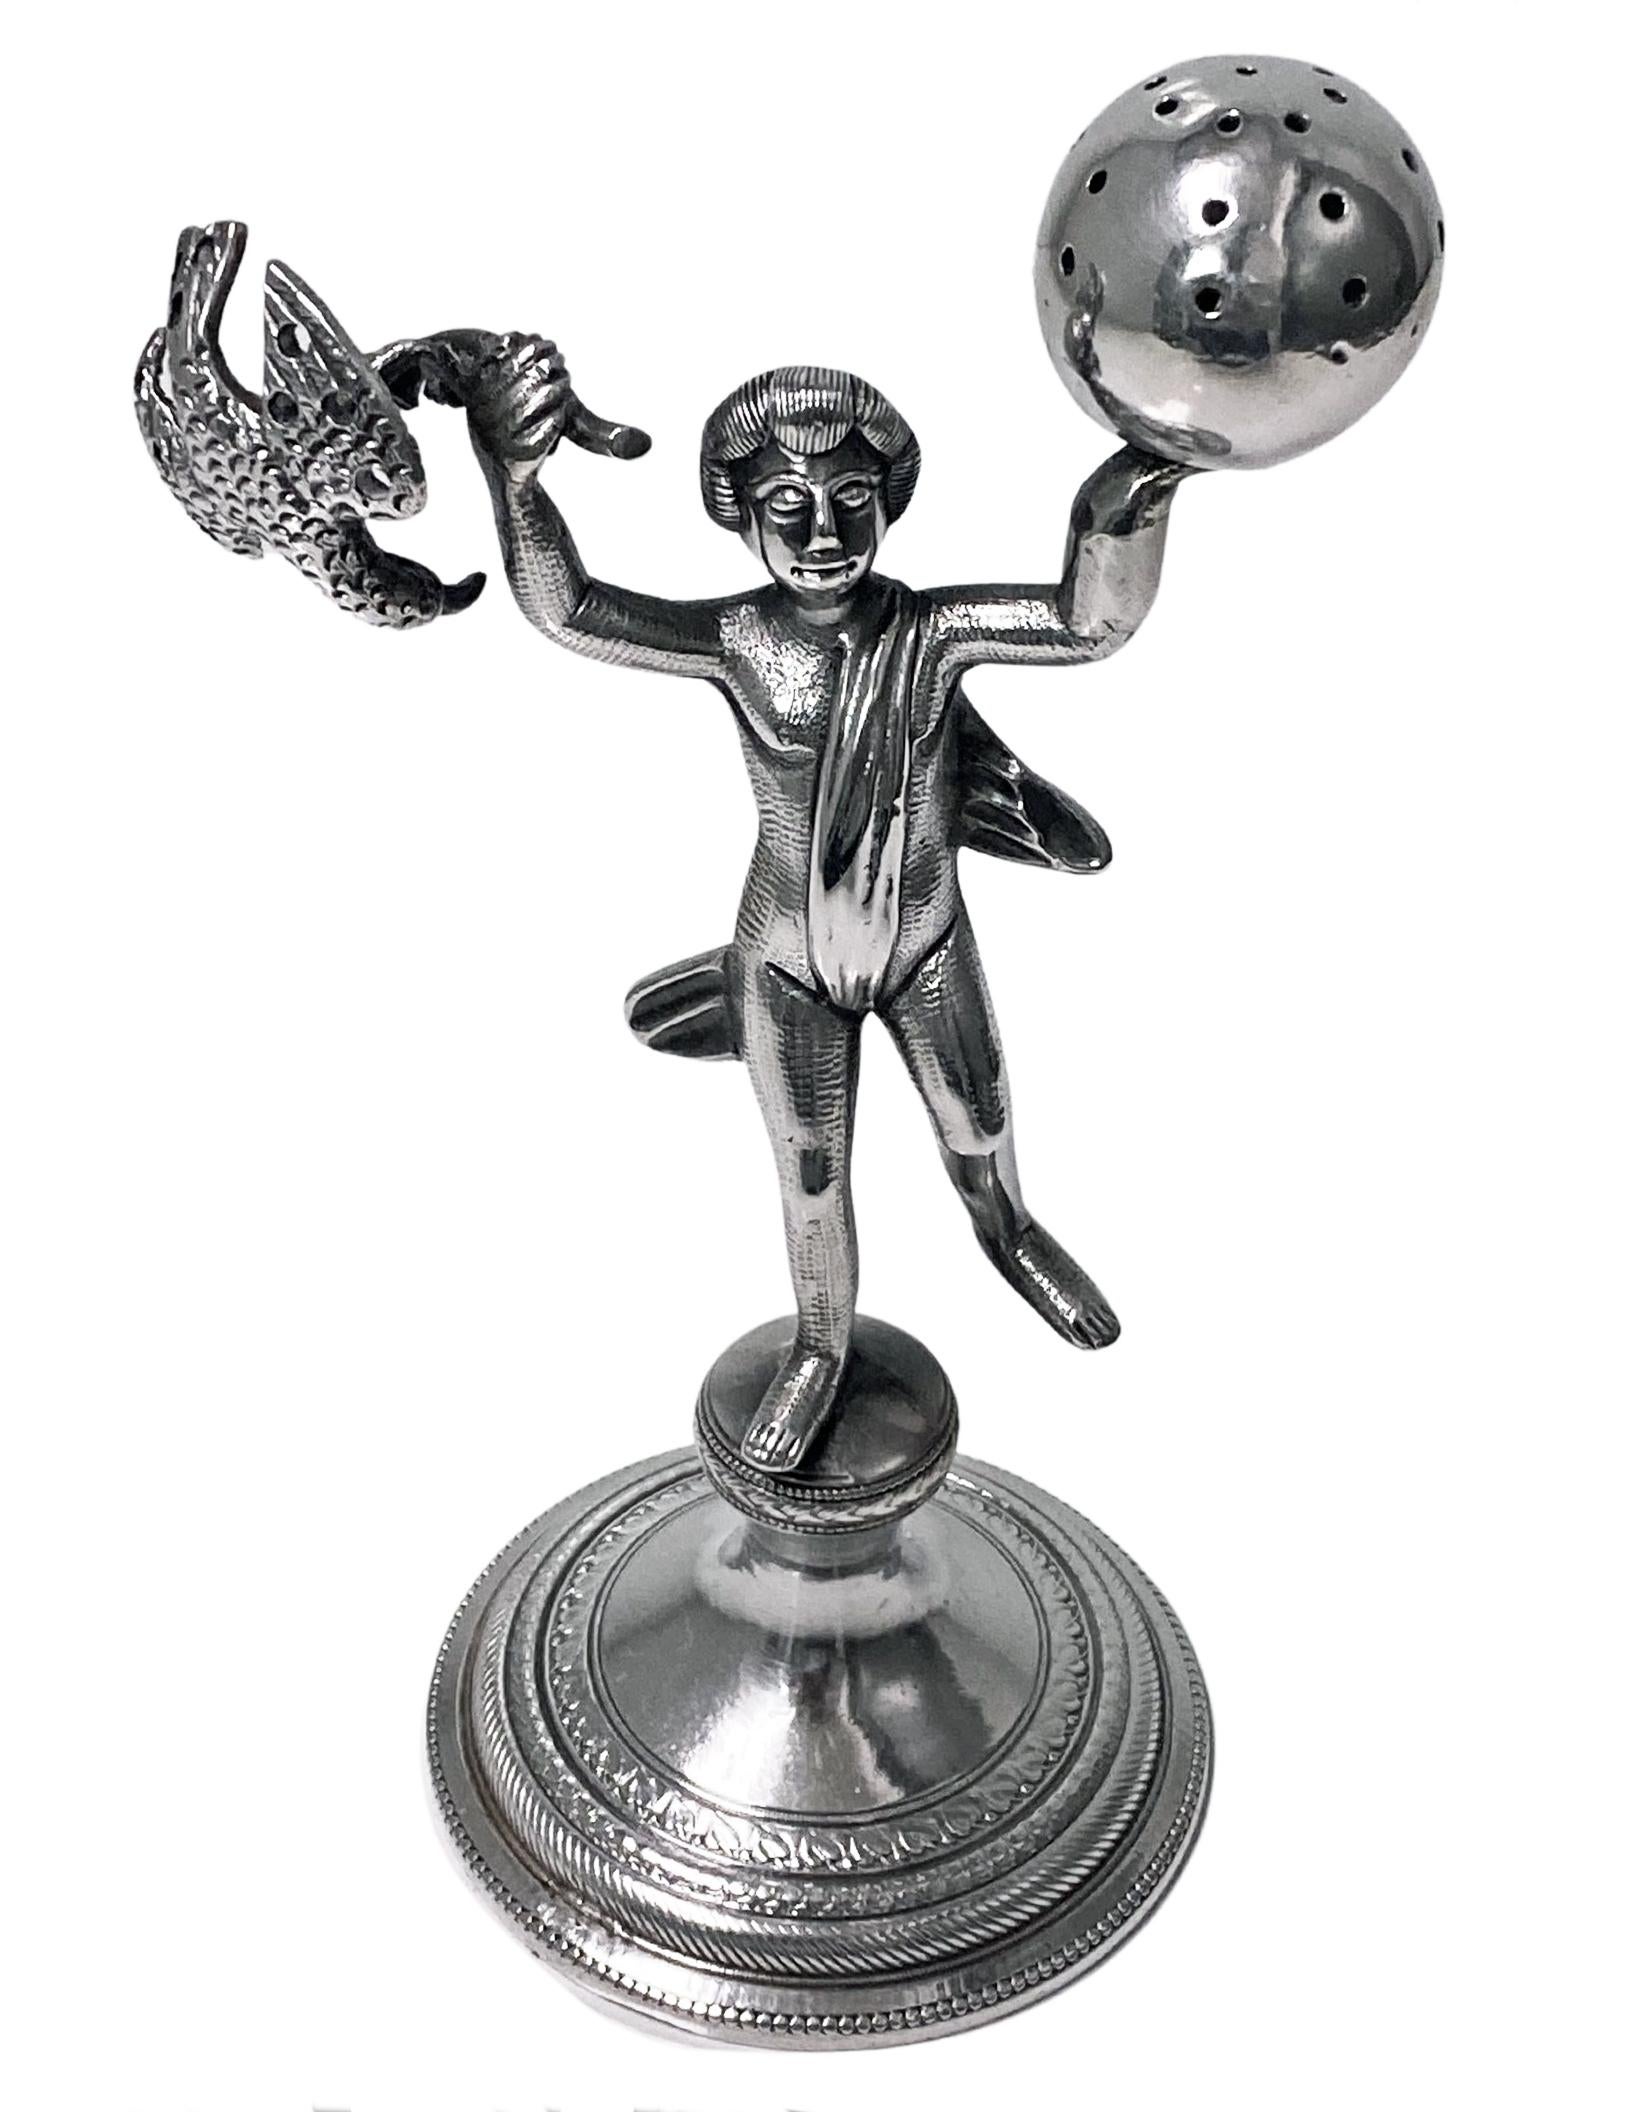 Antique silver toothpick or cocktail stick holder, Brazil, or Portugal circa 1850. The holder in the form of an exotic draped figure holding aloft a globe in one hand and an eagle in the other on knopped stem in turn on circular stepped base. The